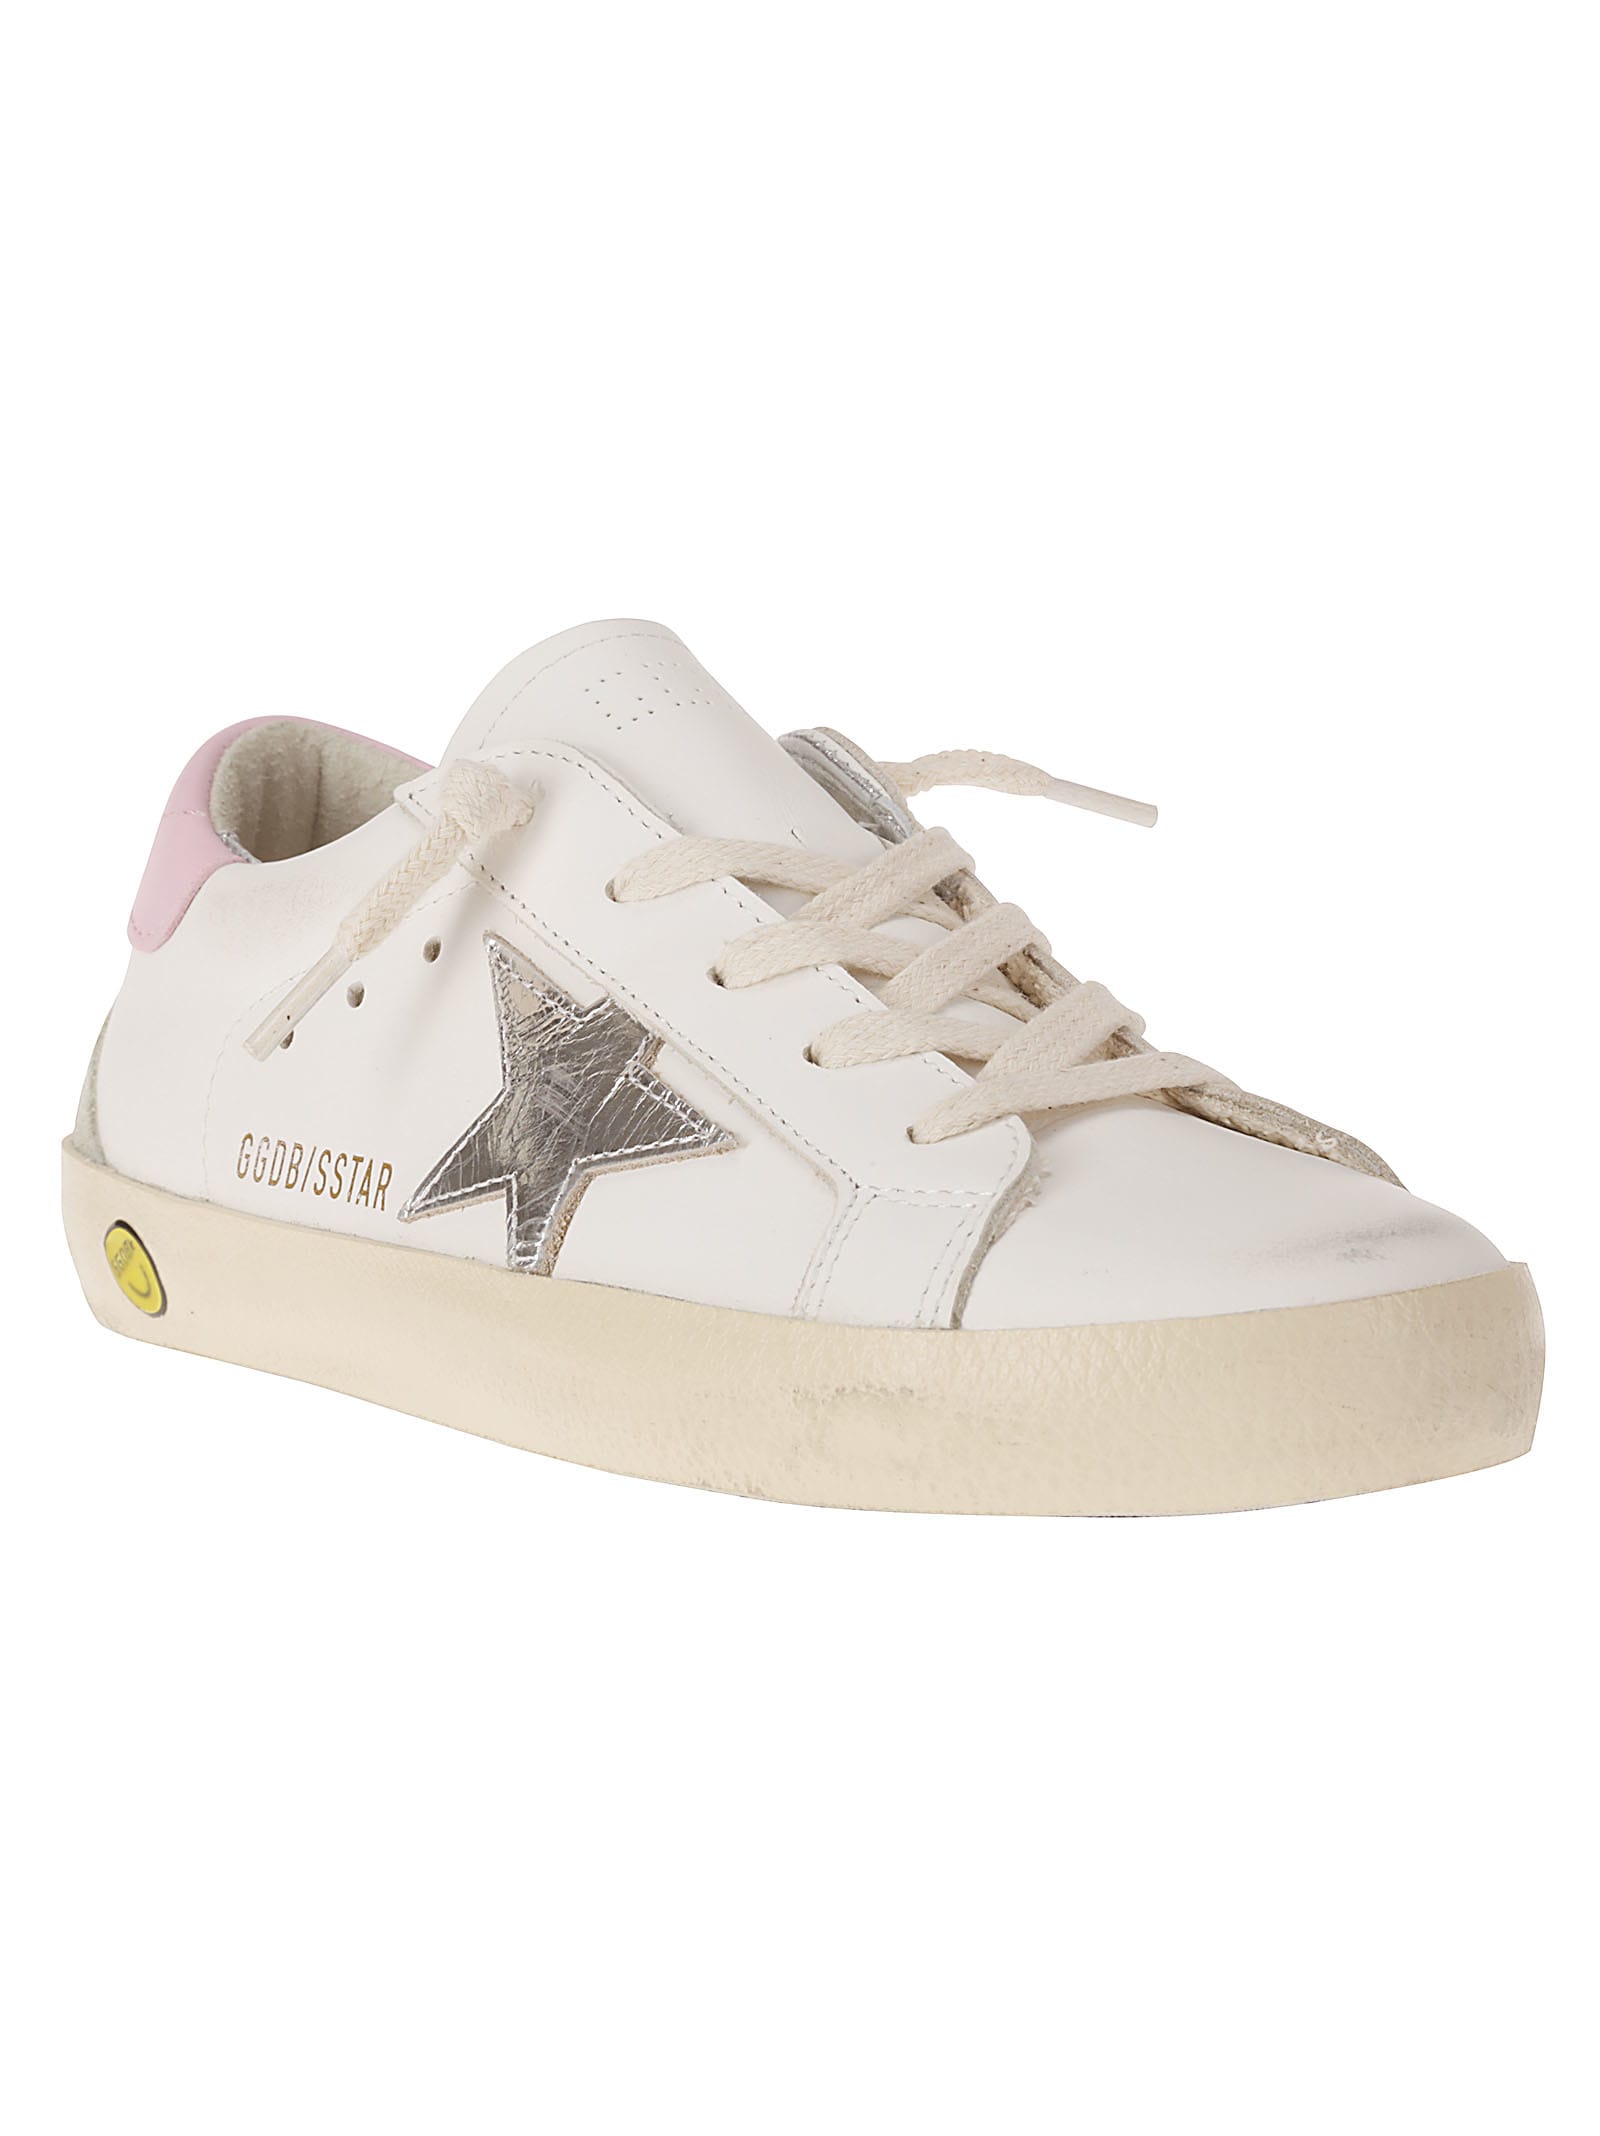 Shop Golden Goose Super-star Leather Upper And Heel Laminated Sta In White/silver/ice/orchid Pink